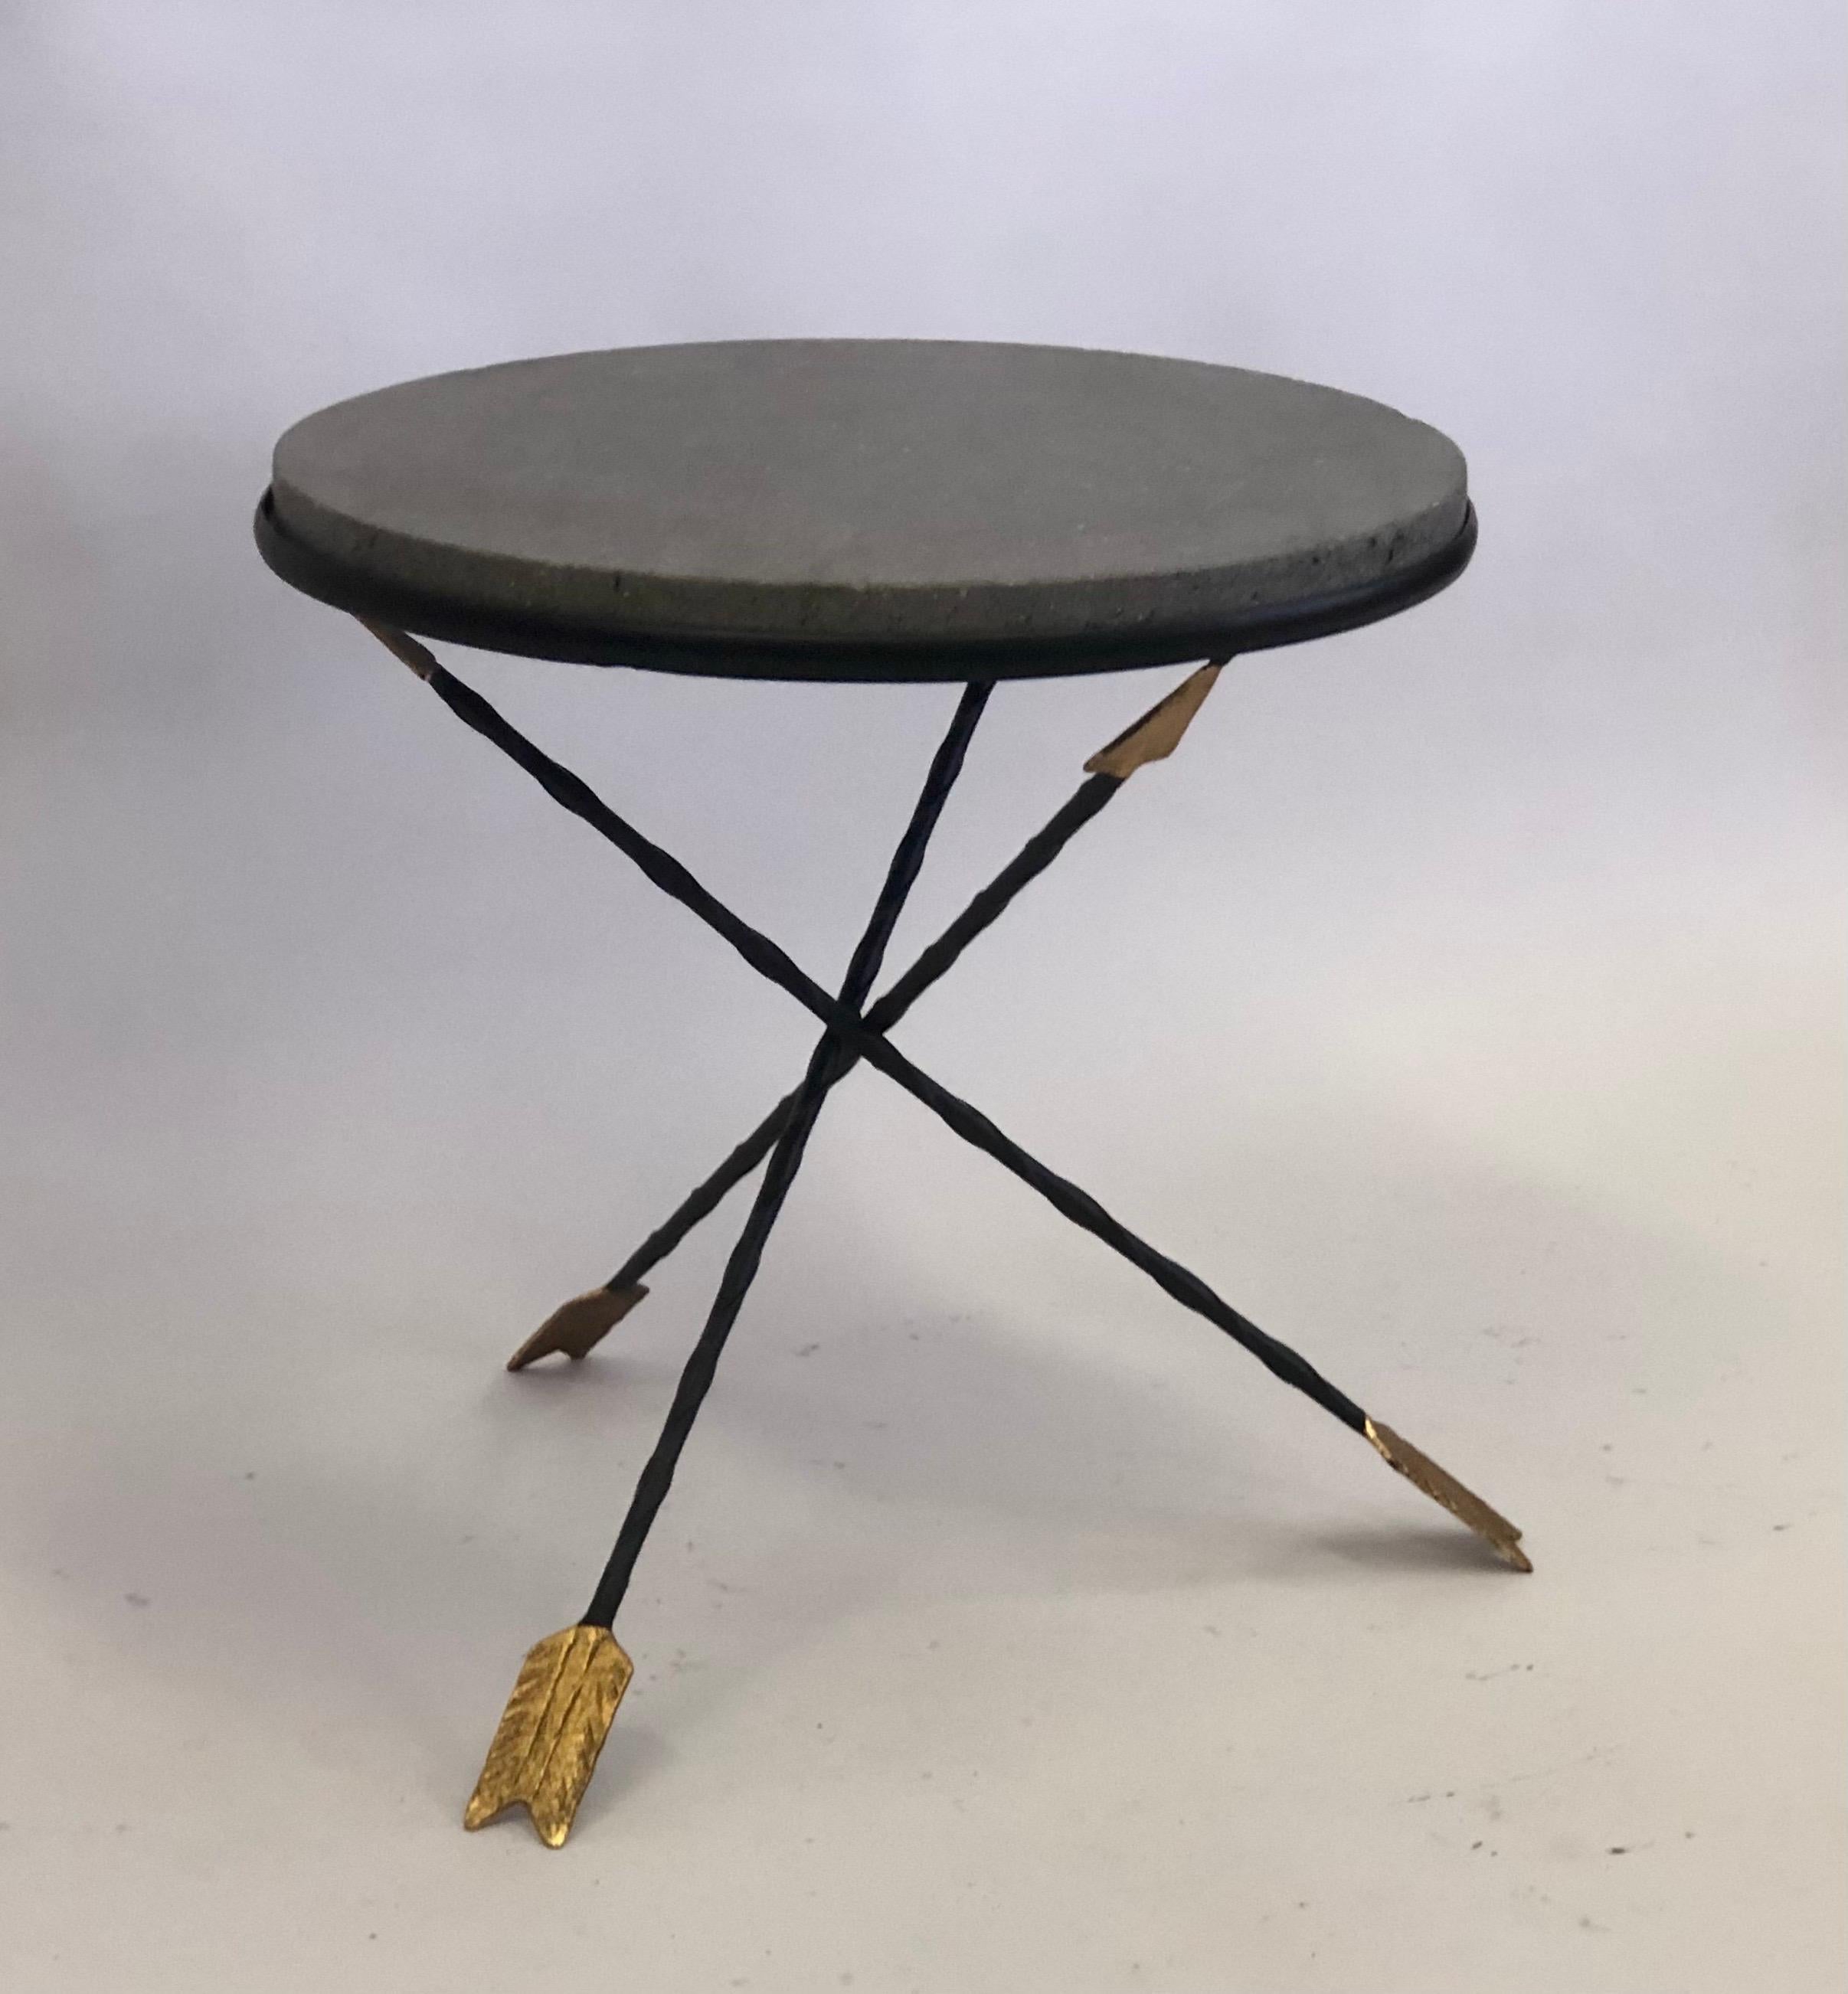 French Modern Neoclassical Gilt Iron & Basalt Stone Side Table by Maison Jansen In Good Condition For Sale In New York, NY